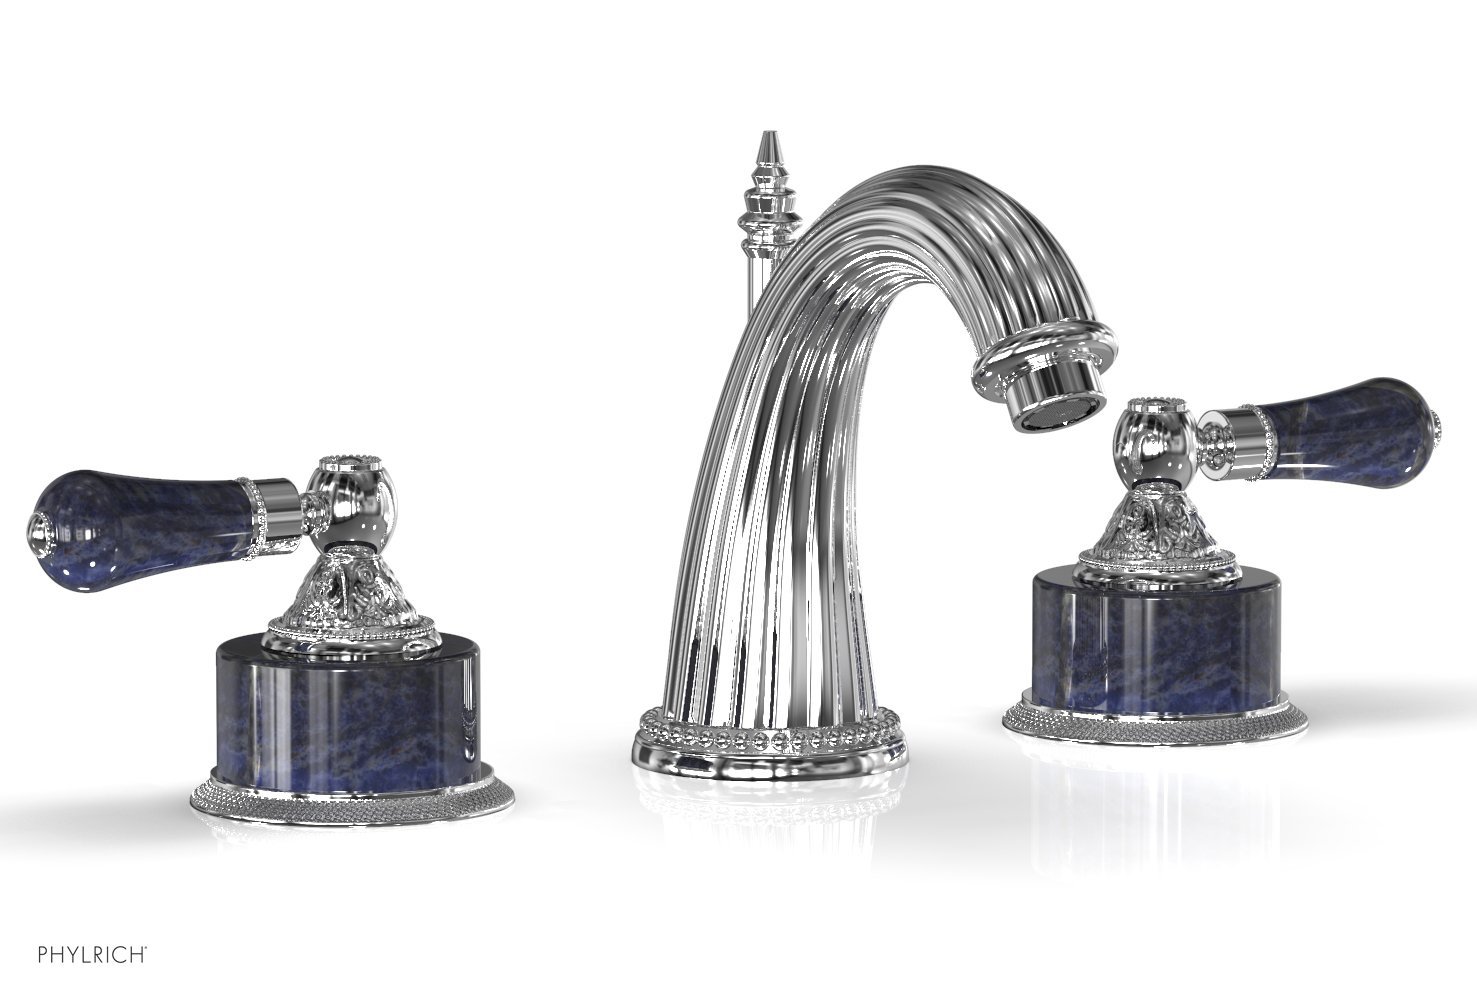 PHYLRICH K332/026 VERSAILLES THREE HOLE WIDESPREAD BATHROOM FAUCET WITH BLEU SODALITE LEVER HANDLES